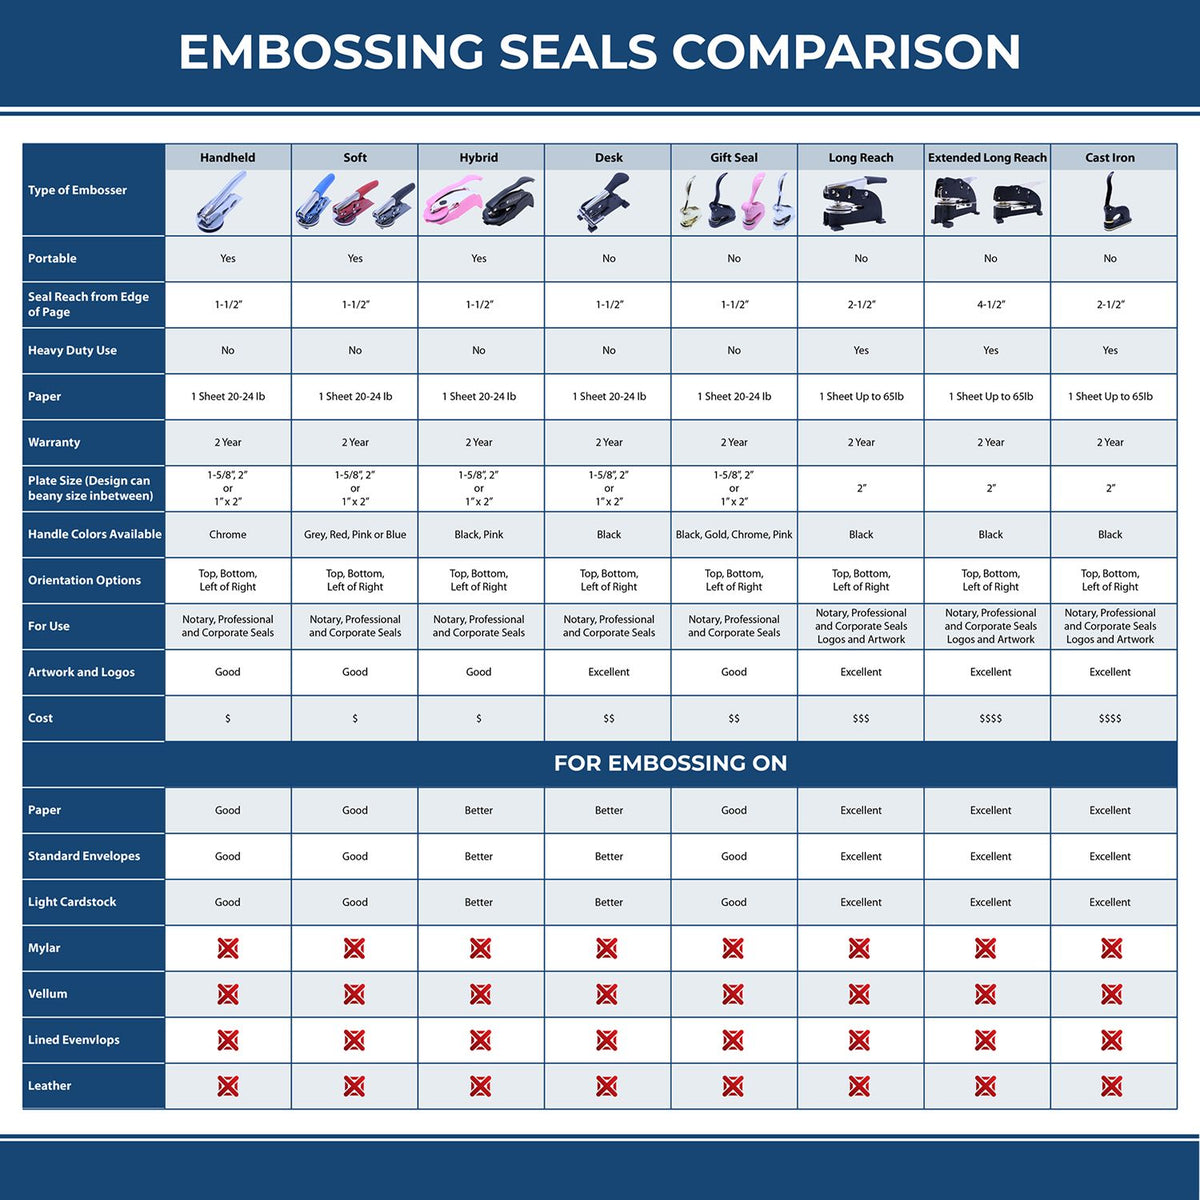 A comparison chart for the different types of mount models available for the Hybrid New Hampshire Land Surveyor Seal